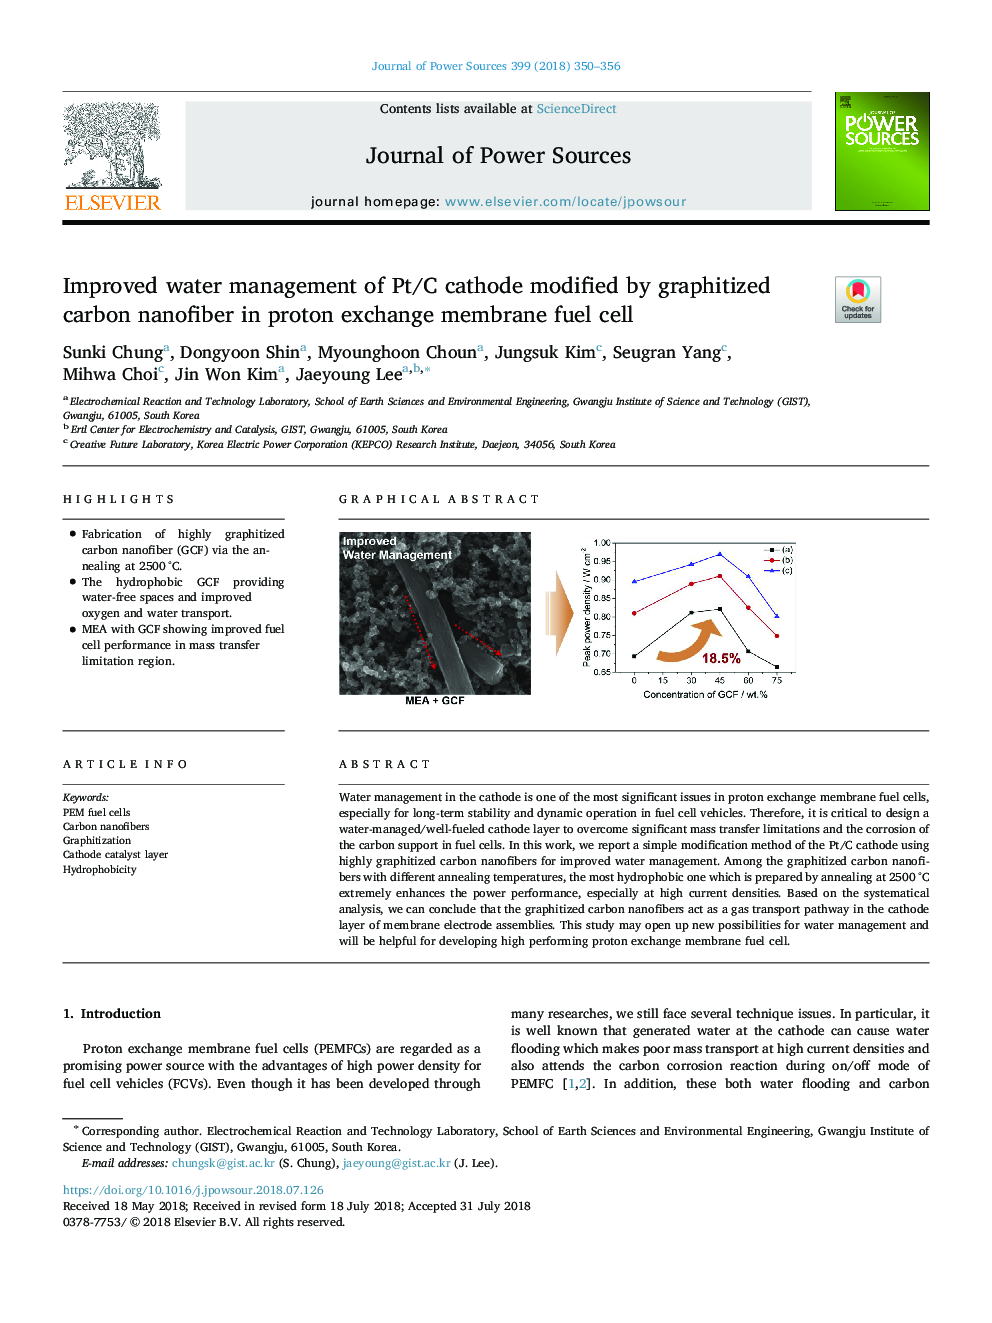 Improved water management of Pt/C cathode modified by graphitized carbon nanofiber in proton exchange membrane fuel cell